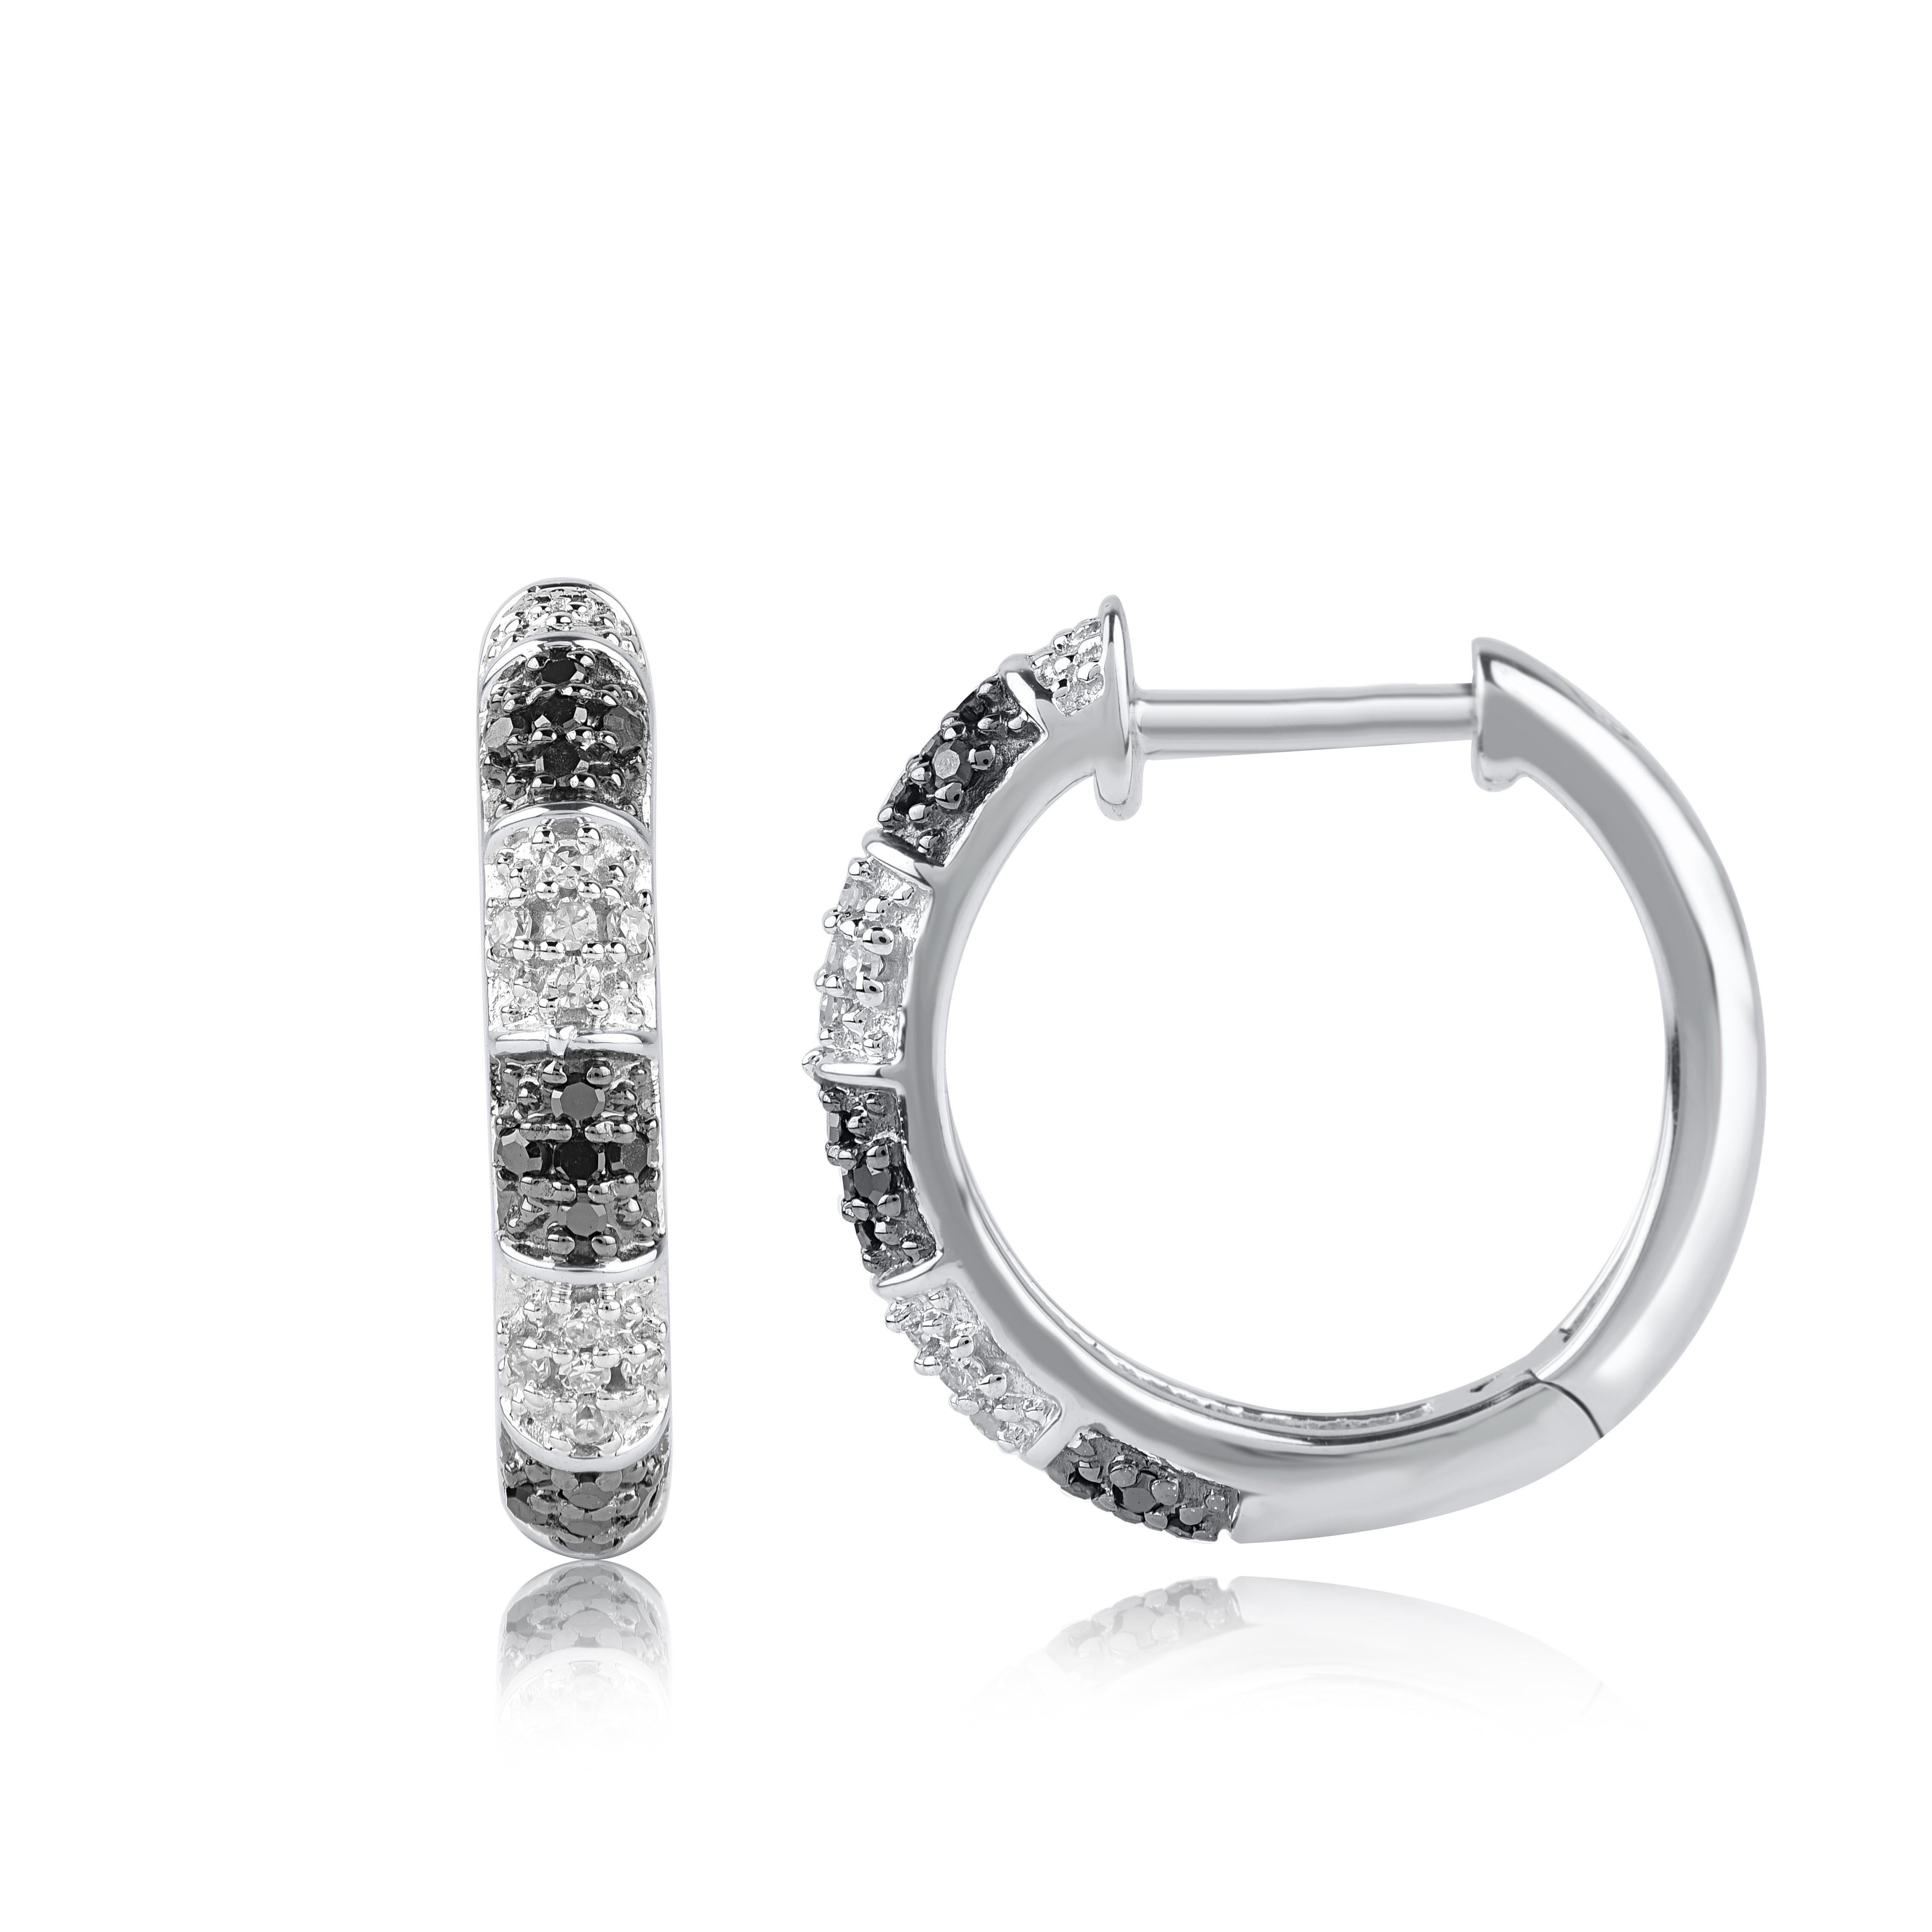 Classic and stylish diamond studded hoop earrings! perfect for daily wear. Crafted in 14 Karat white gold with 50 single cut diamond and Black treated diamond in prong setting. These earring secure with hinged backs. The white diamonds are graded as